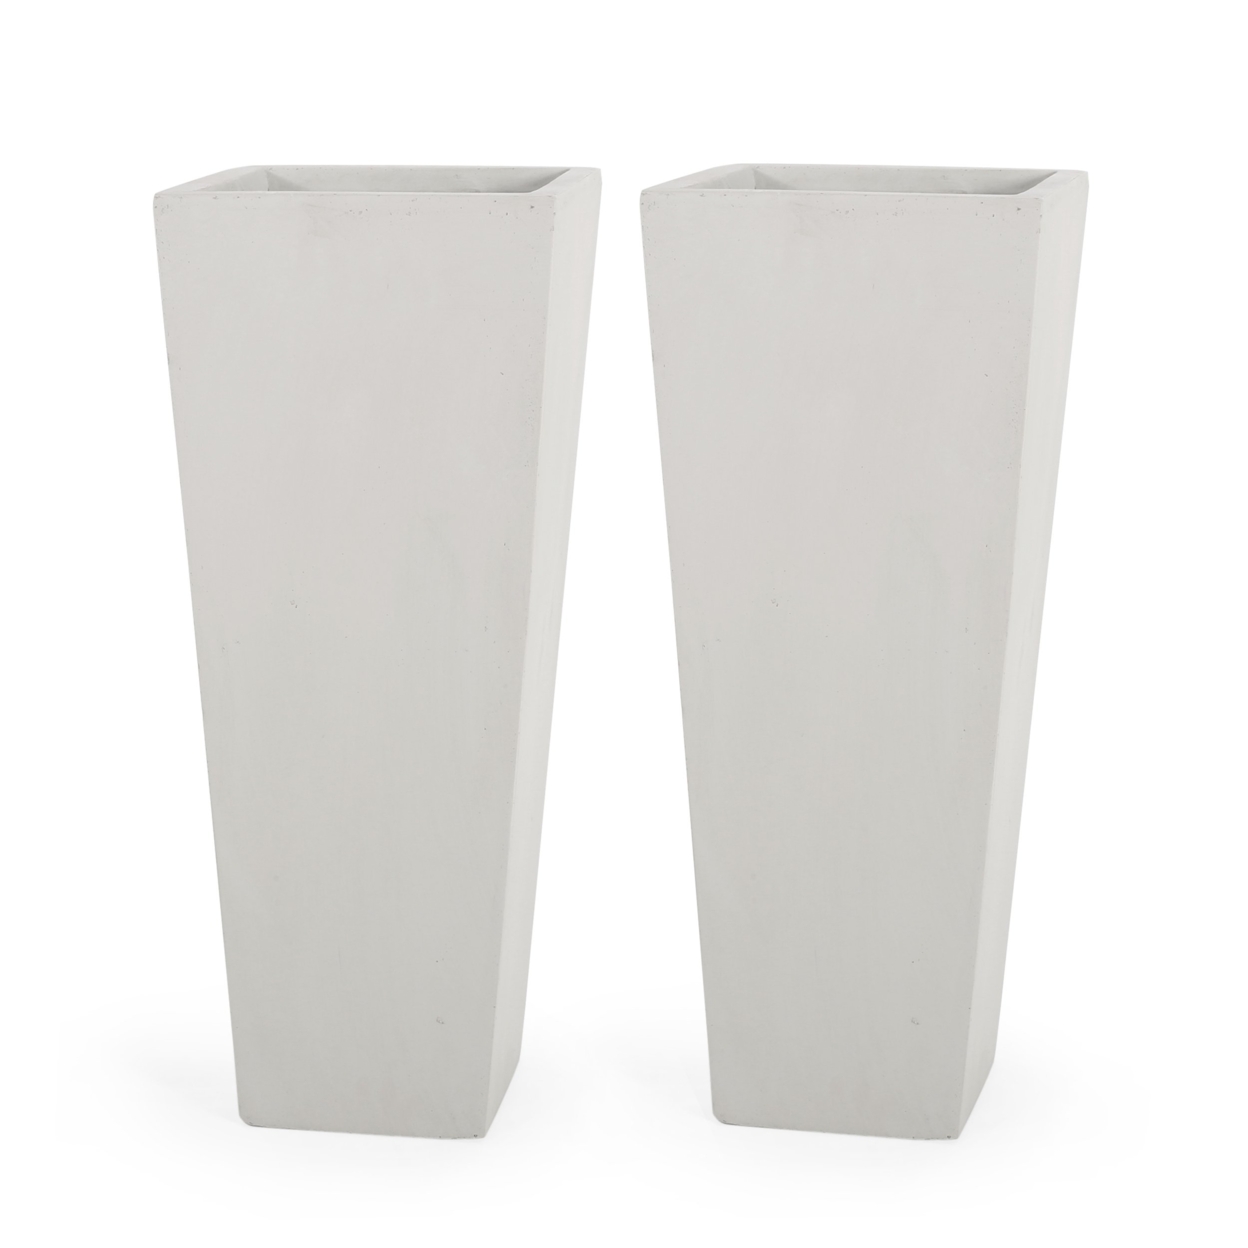 Toland Outdoor Modern Cast Stone Planters (Set Of 2) - Matte White, Large